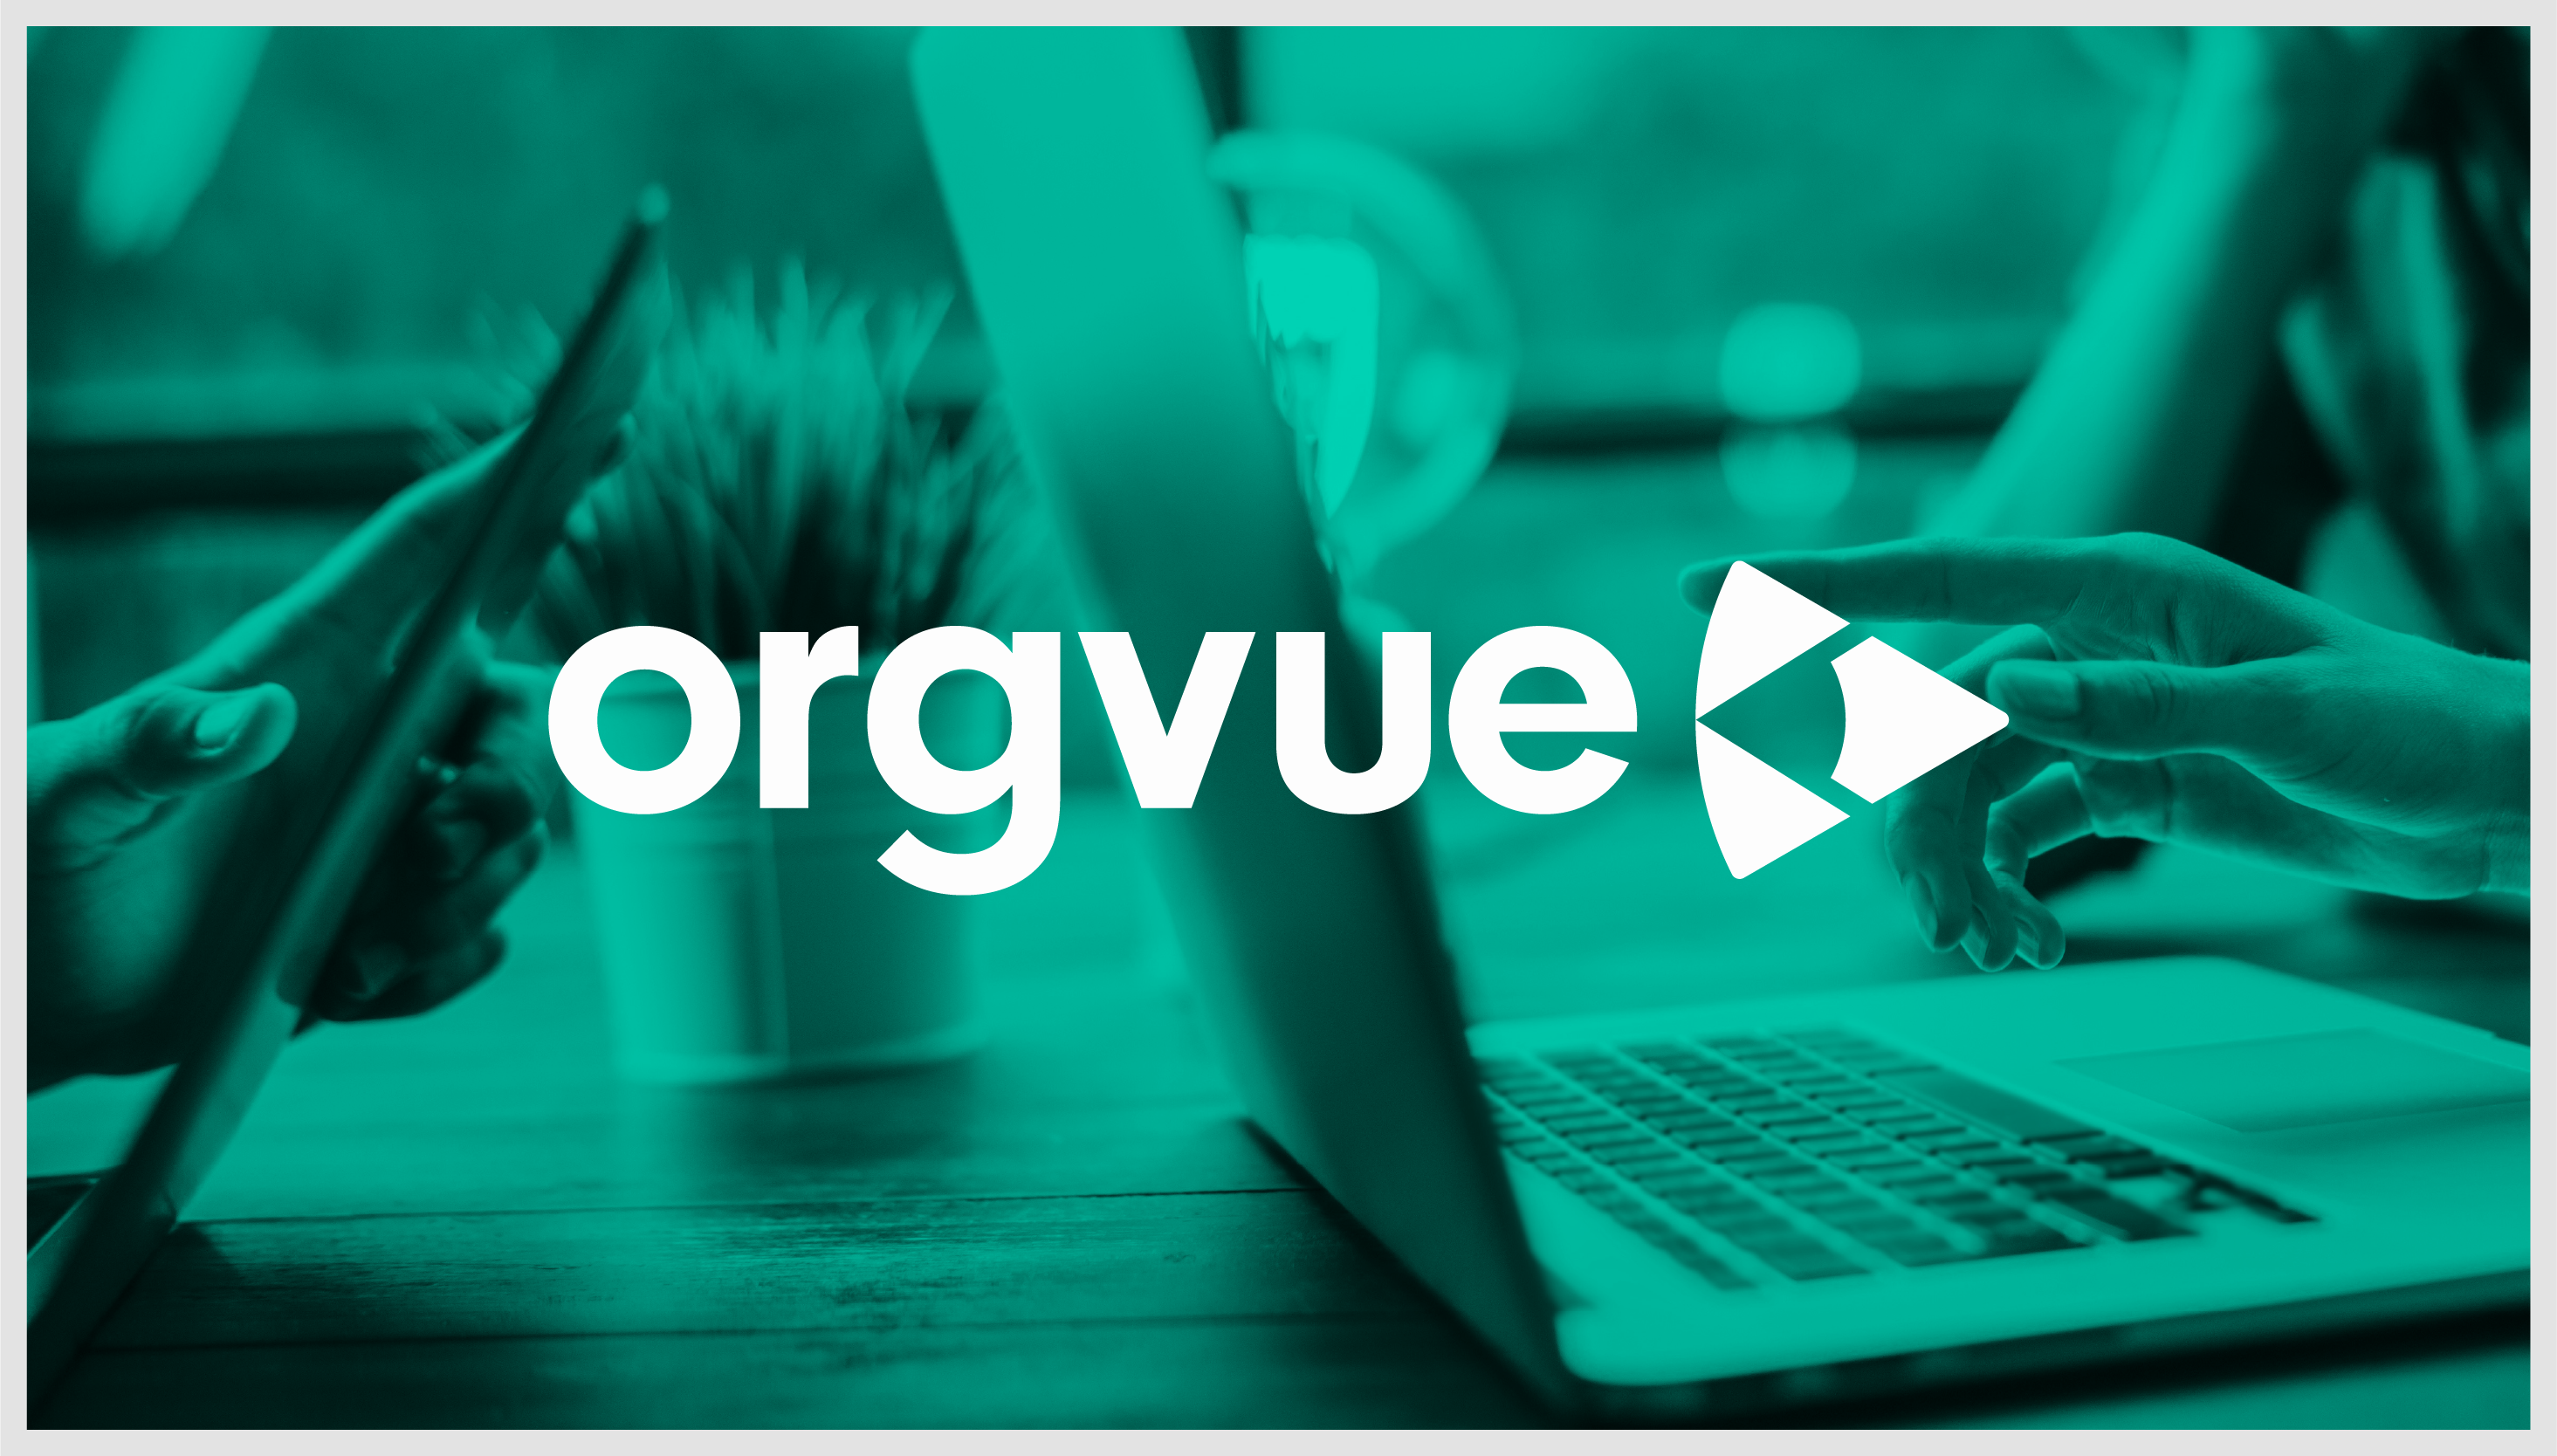 Orgvue logo over a photograph of two revenue leaders looking at reports on a laptop and tablet